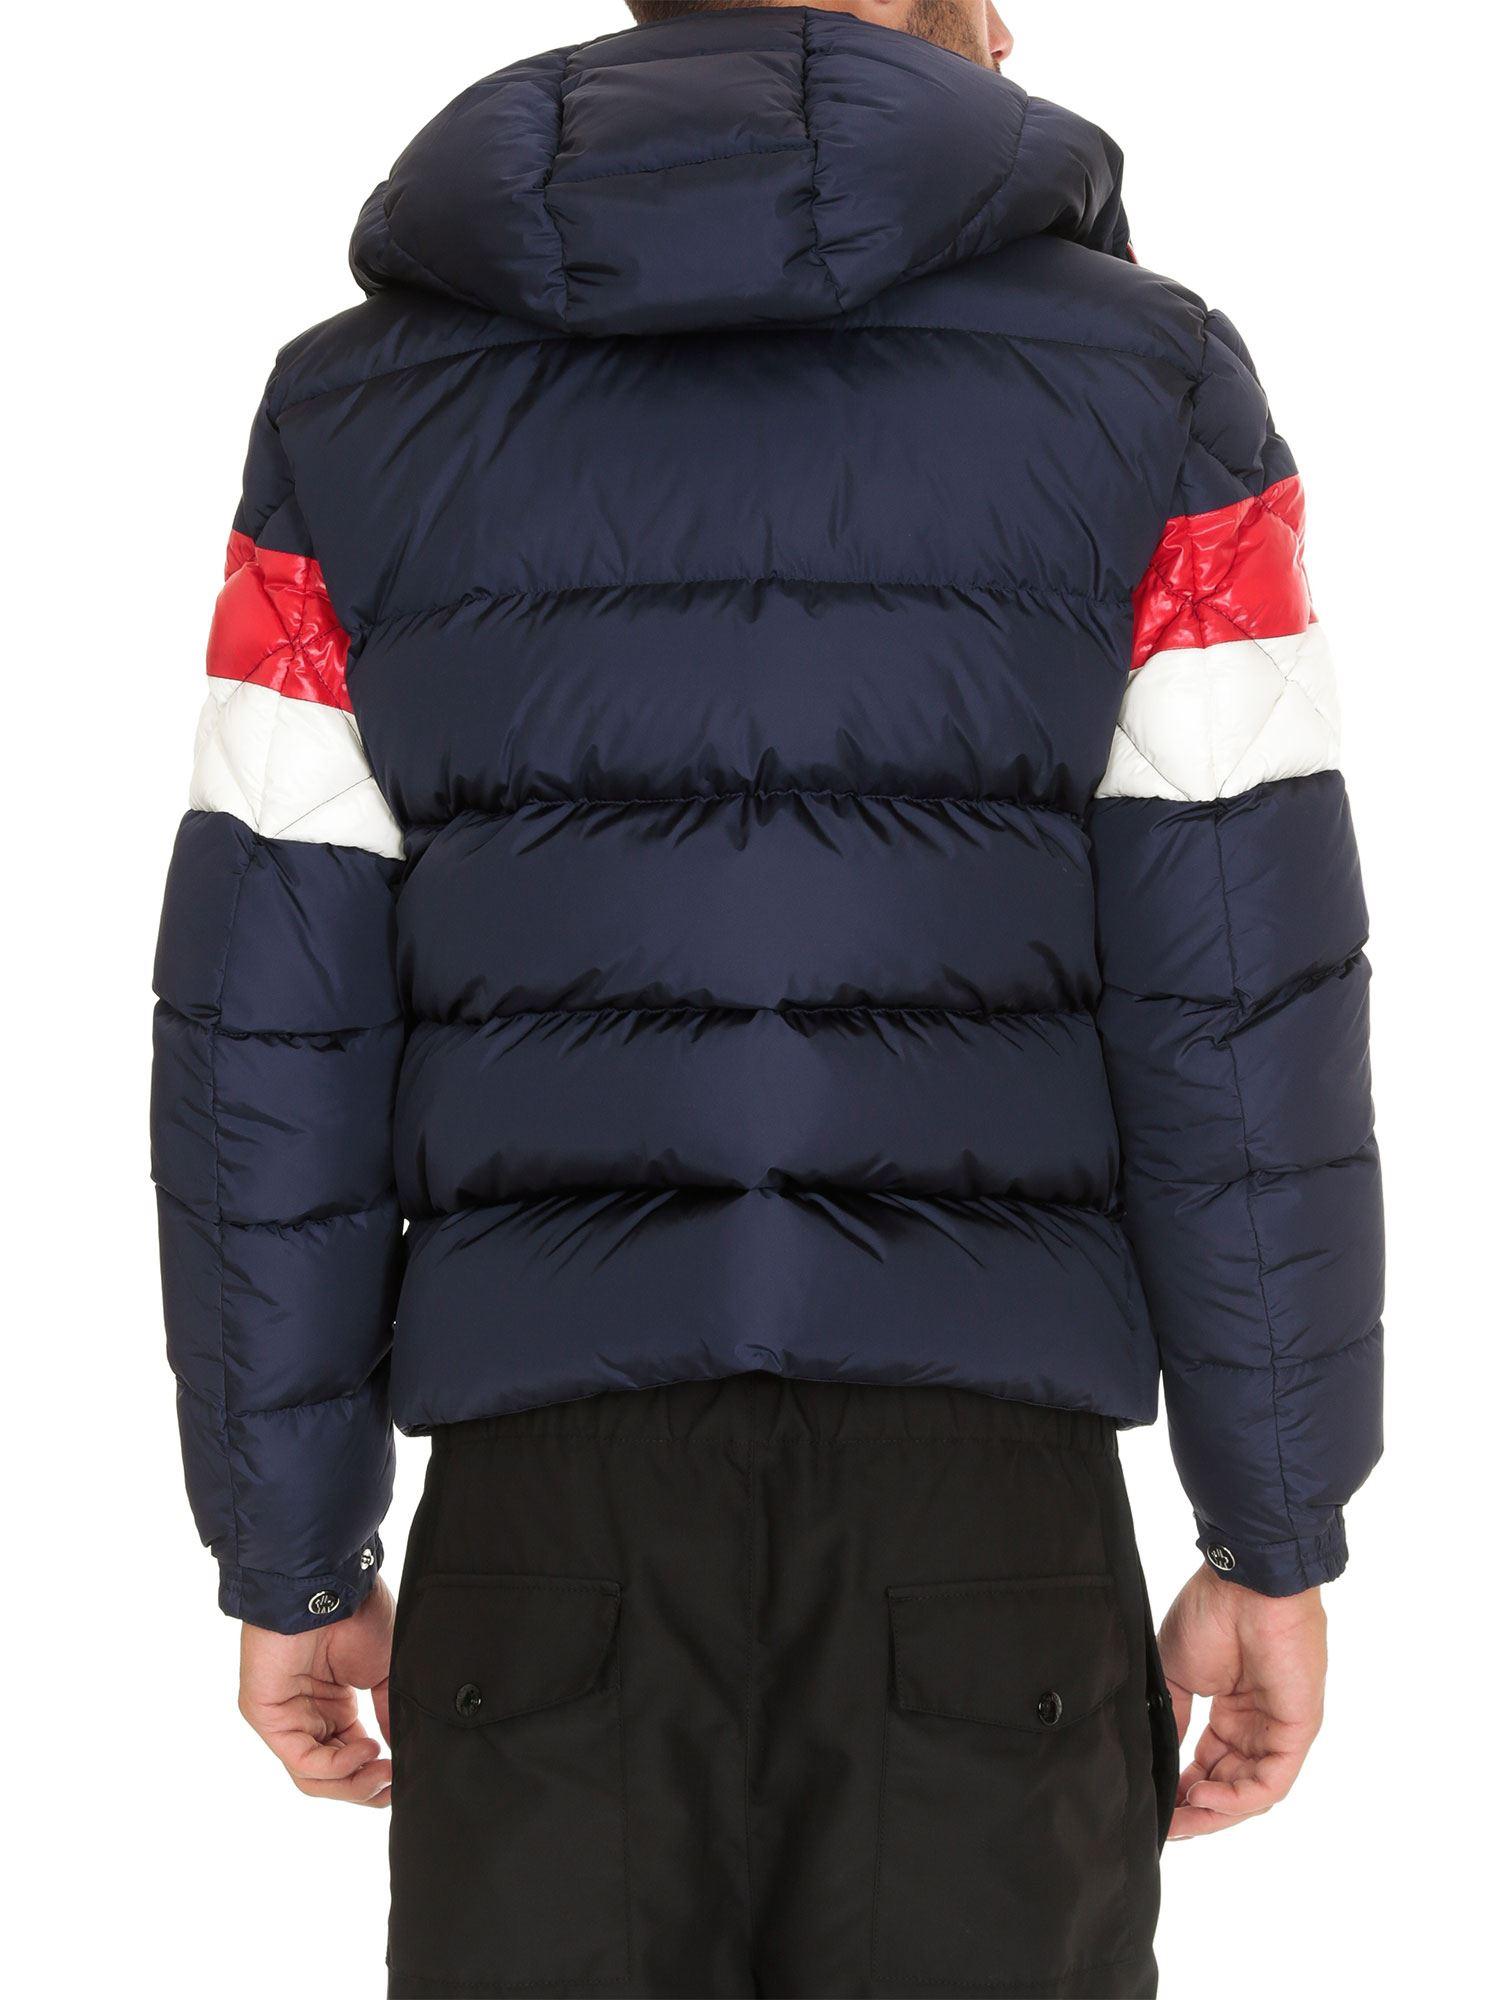 Moncler Synthetic Janvry Jacket in White/Navy/Red (Blue) for Men - Lyst